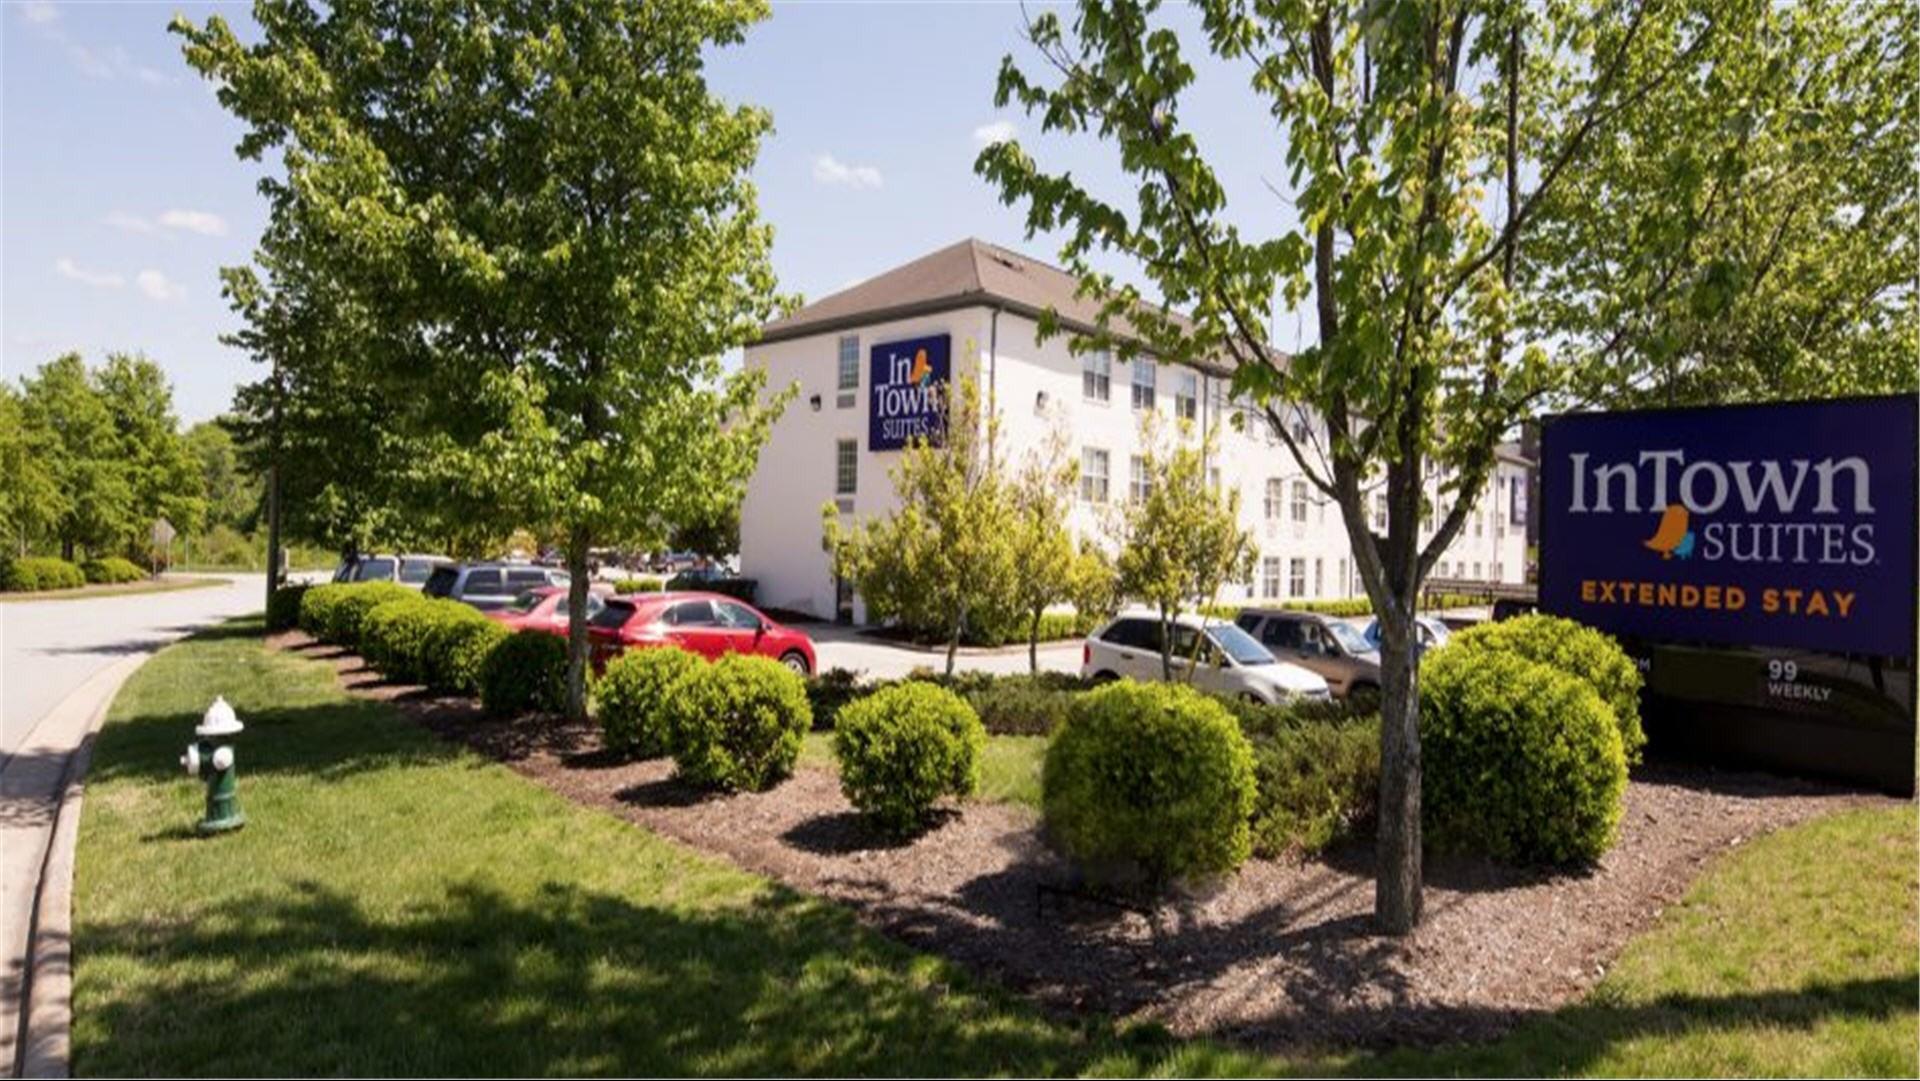 InTown Suites- Orlando/Florida Turnpike Extended Stay in Orlando, FL